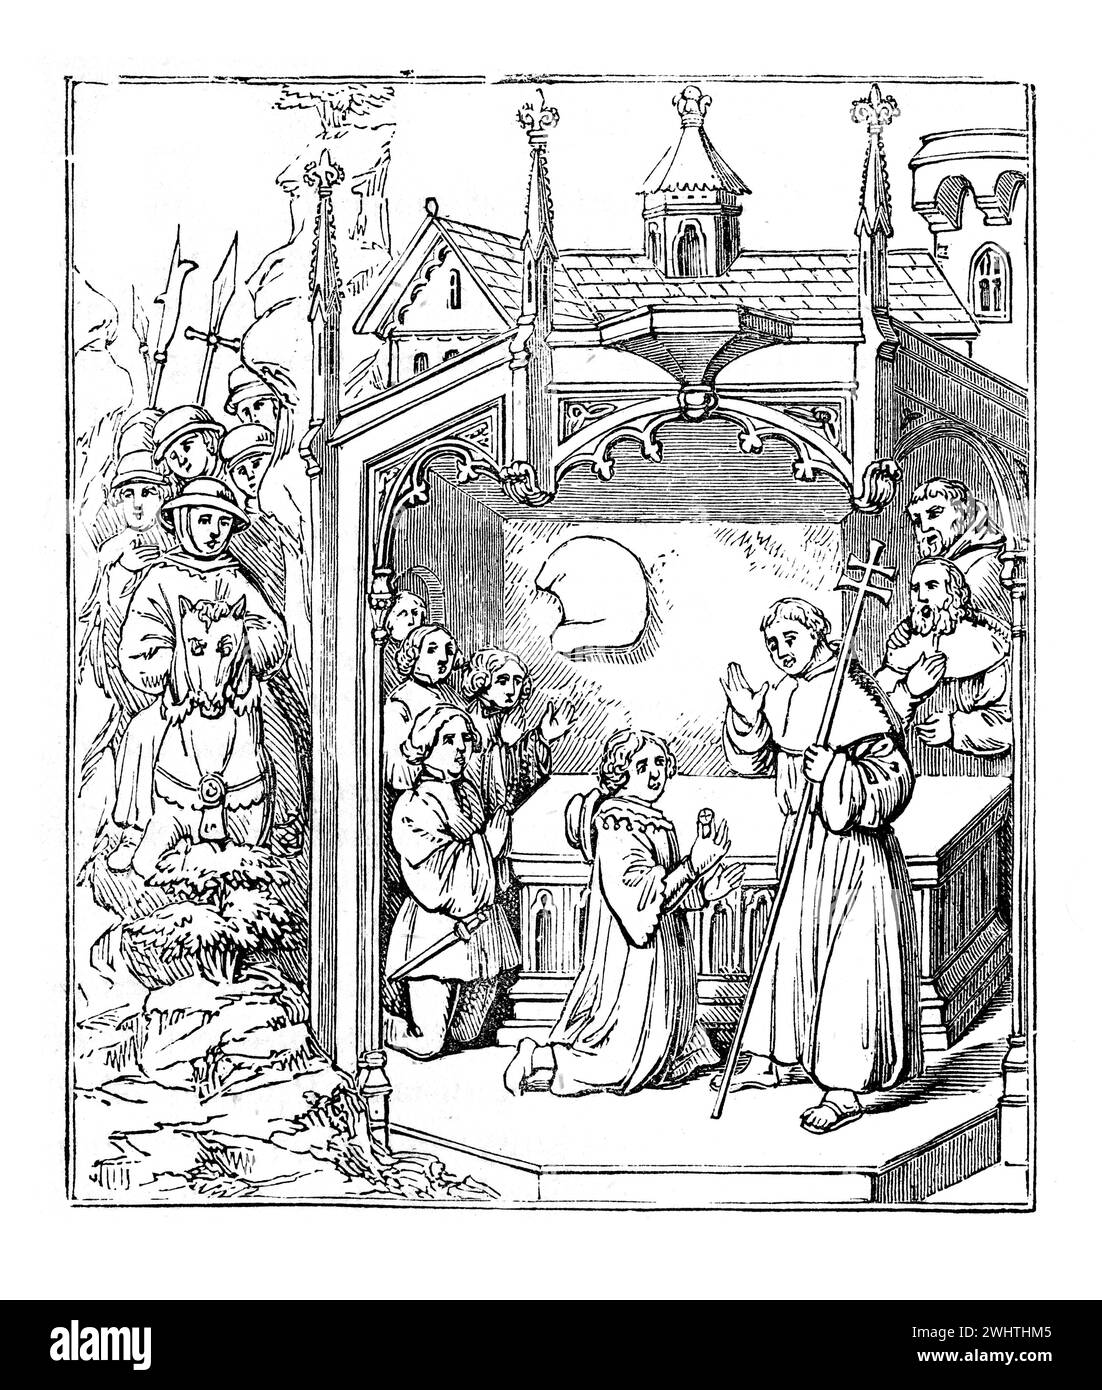 Richard Beauchamp, Earl of Warwick as a Pilgrim, worshipping at the Holy Sepulchre in Jerusalem. From MS of Rouse's History of the Earls of Warwick. Black and White Illustration from the 'Old England' published by James Sangster in 1860. Stock Photo